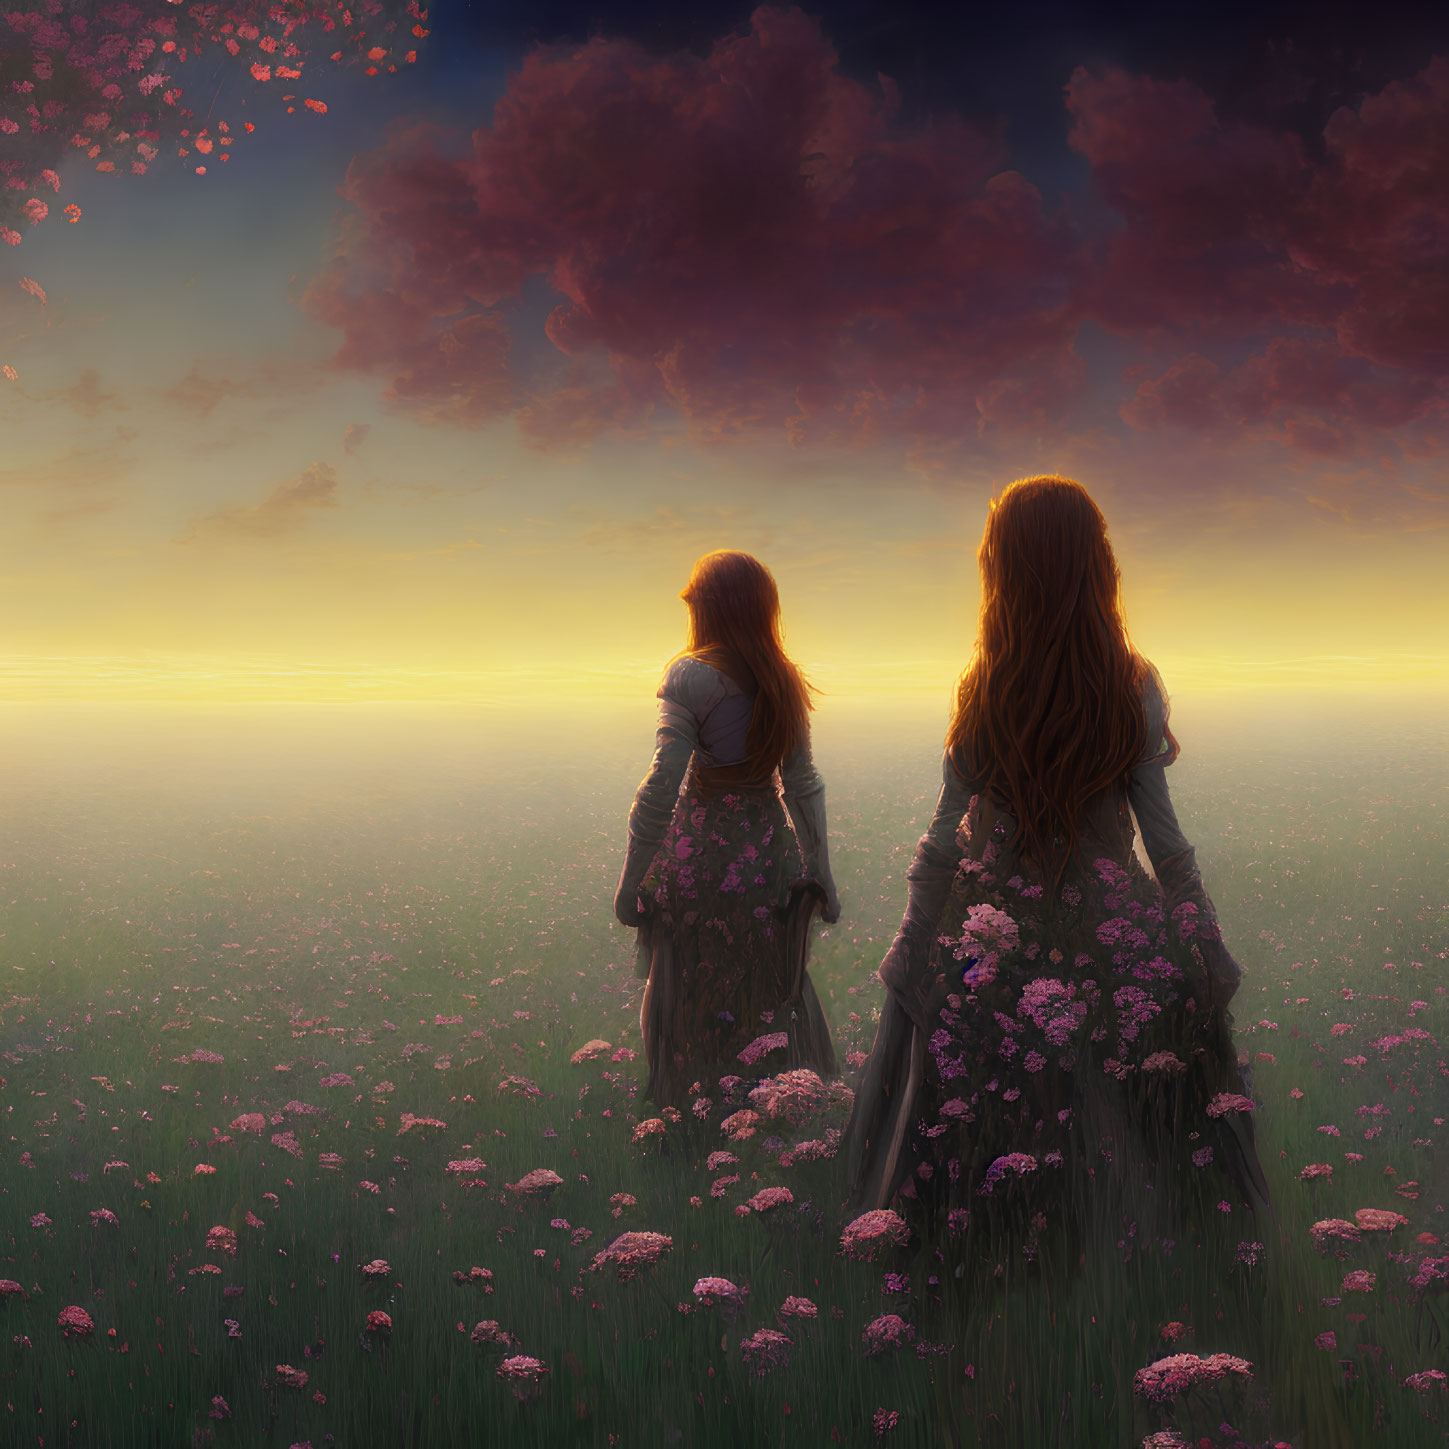 Two Women in Medieval Dresses in Flower Field at Sunset